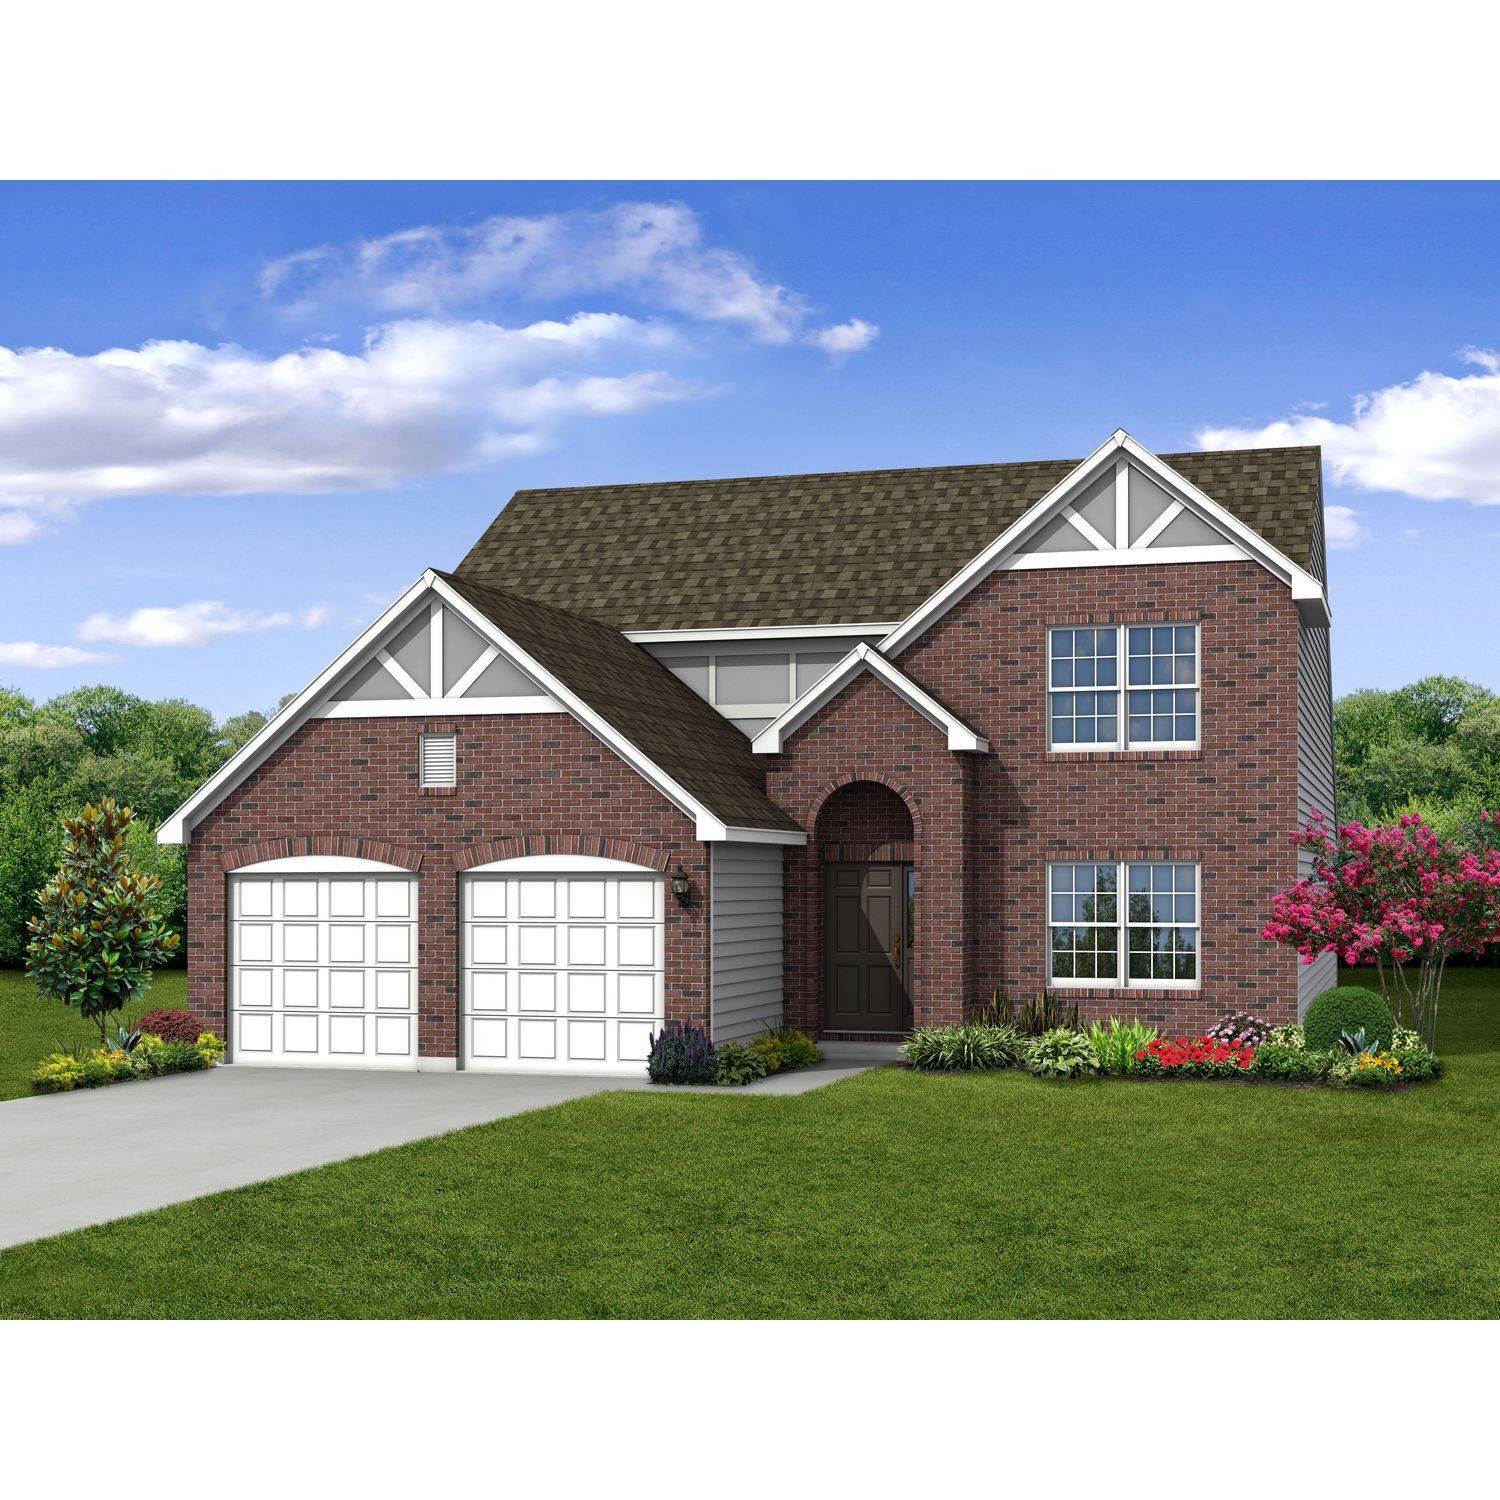 2. Single Family at The Overlook At Eastwood Louisville, KY 40245